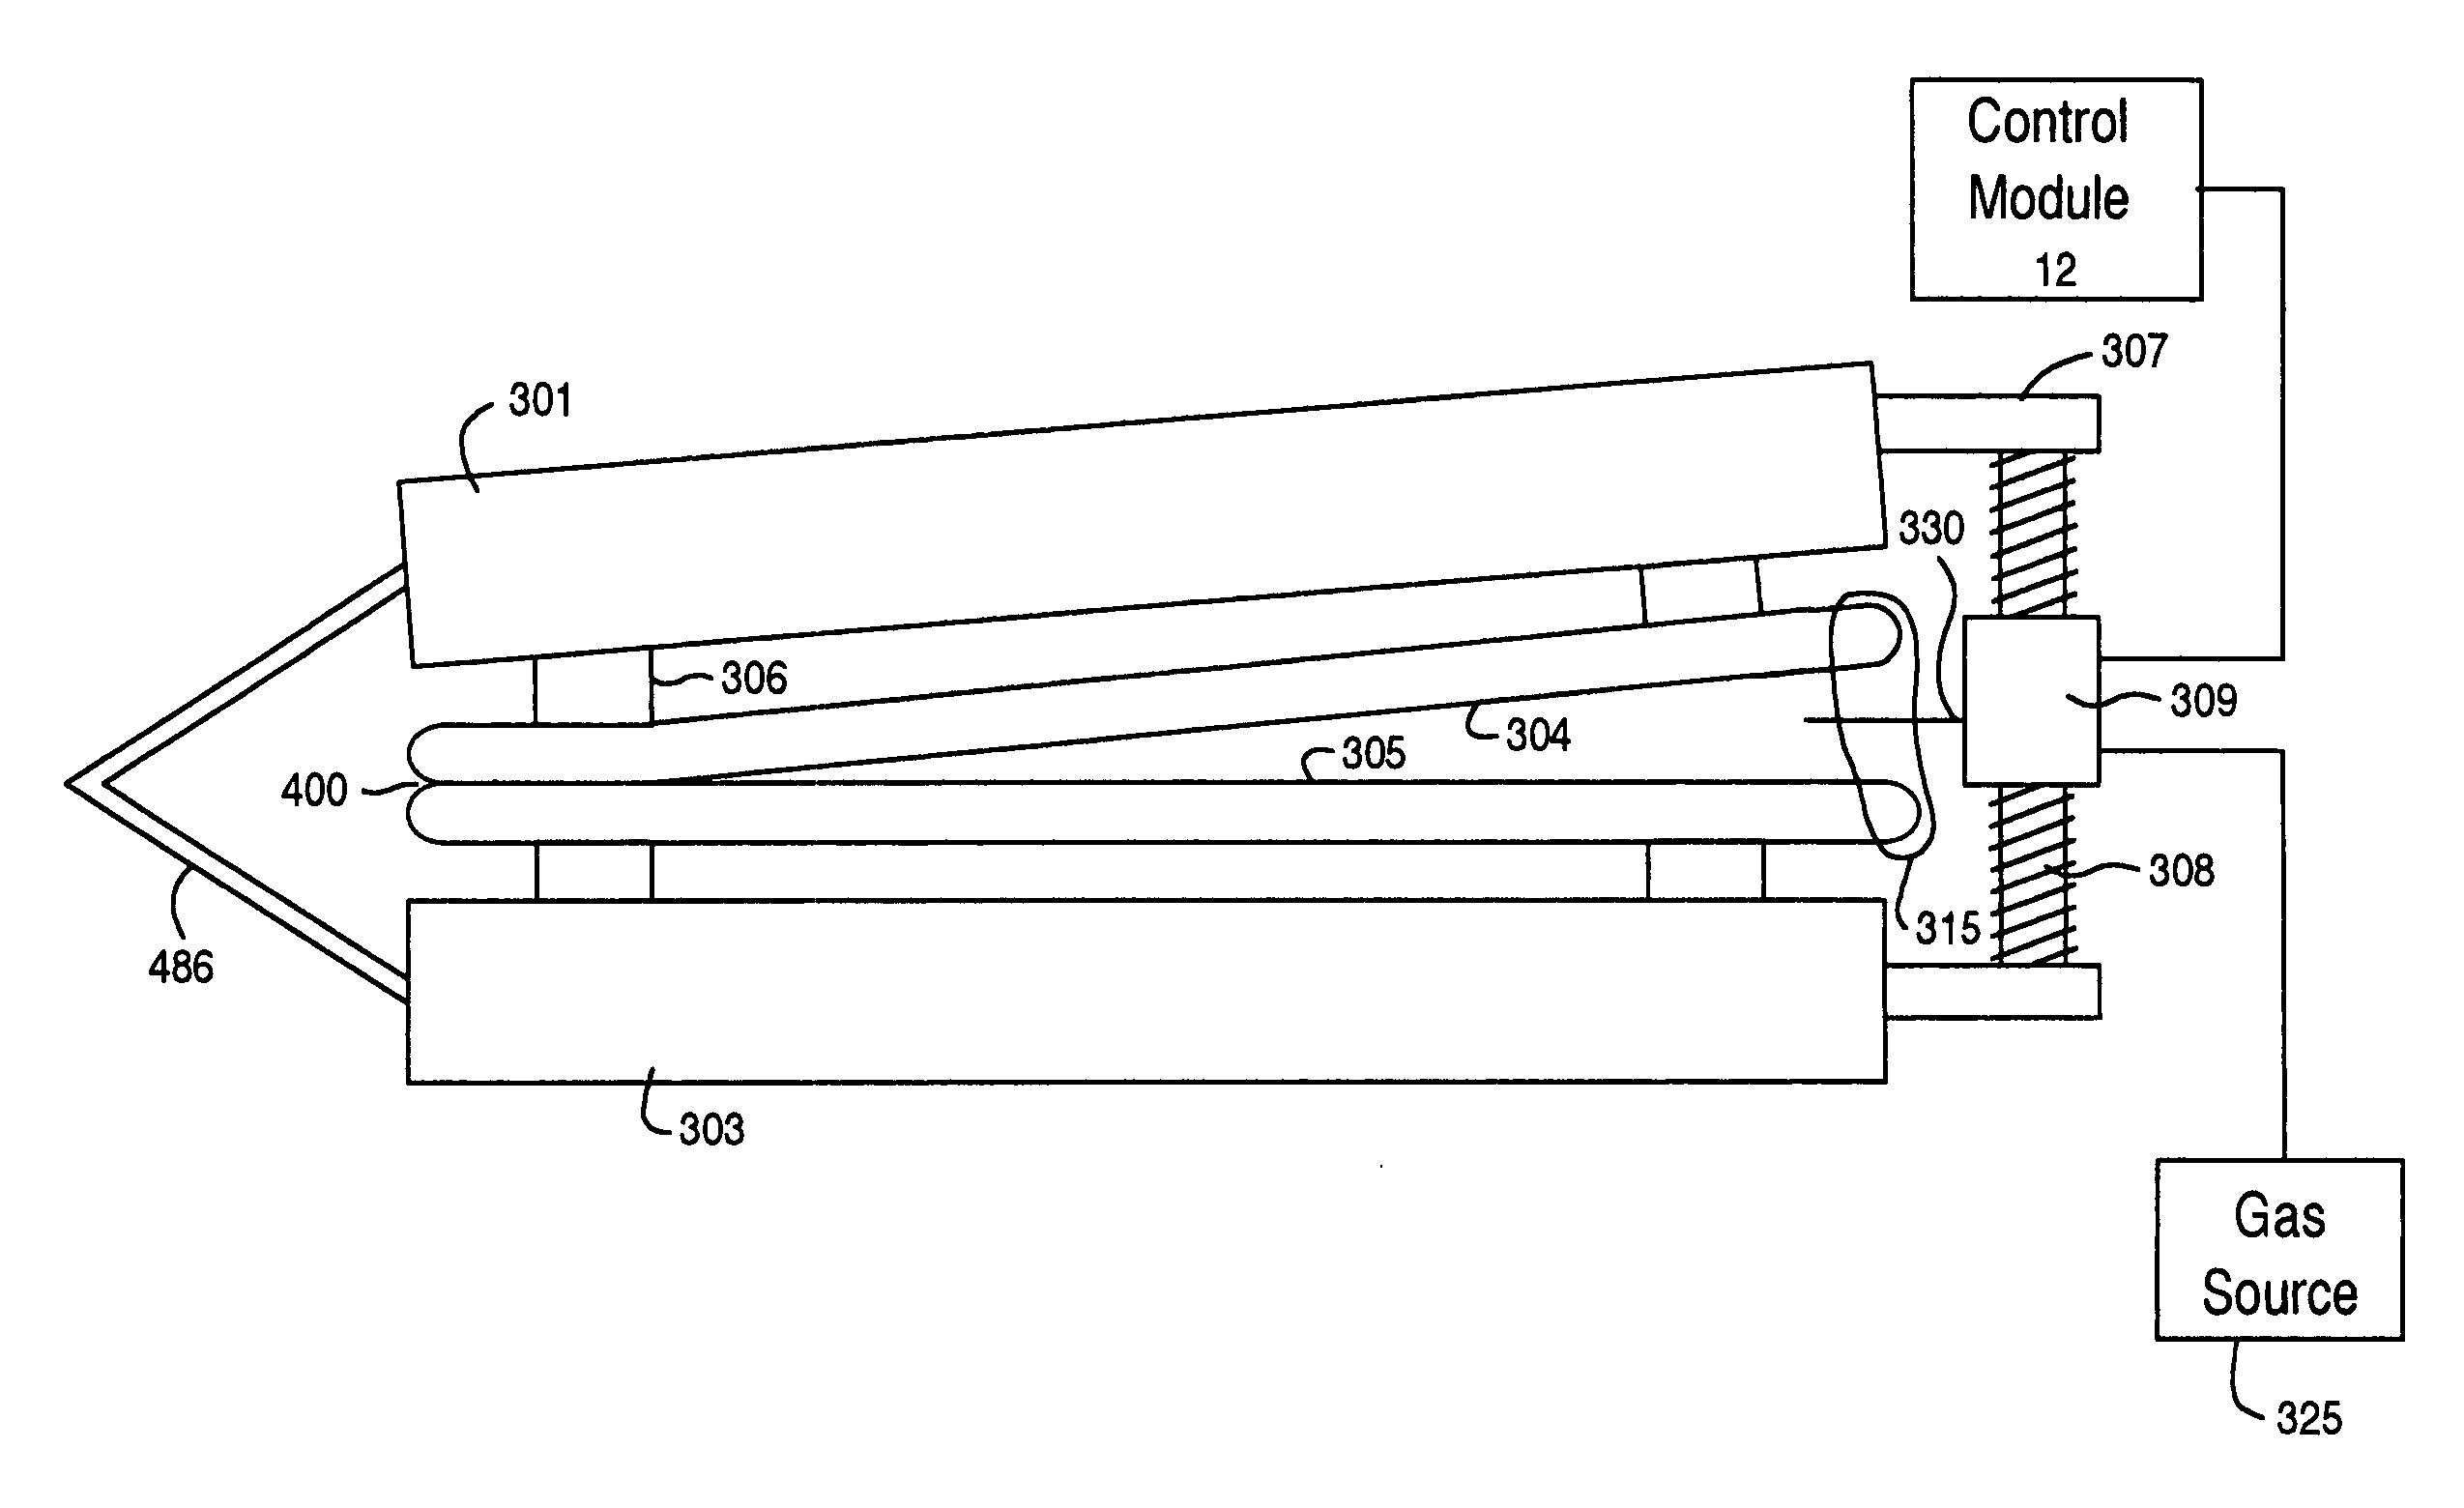 Apparatus and method for controlled cleaving